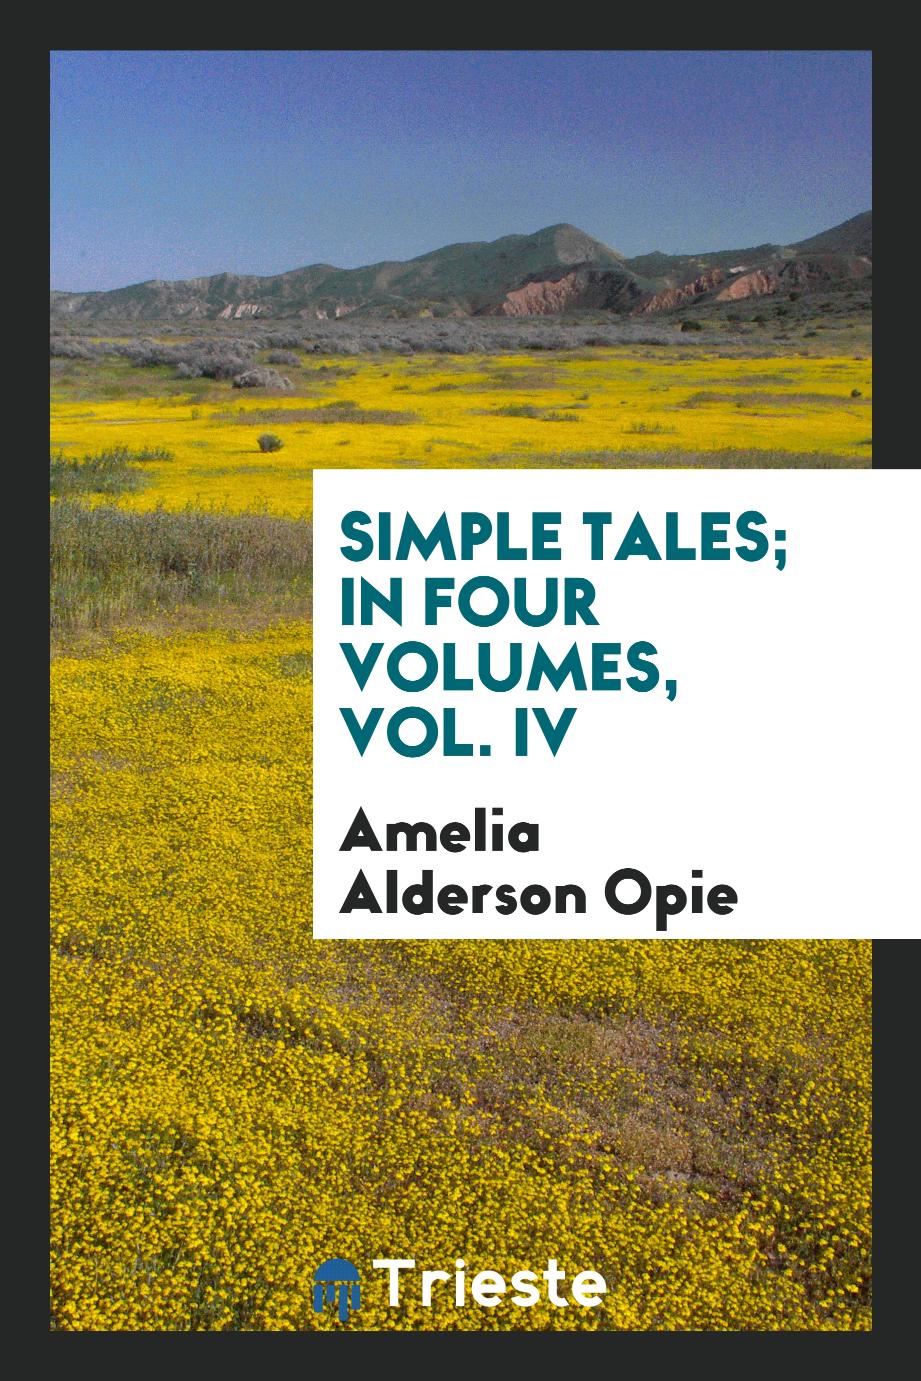 Simple tales; In four volumes, Vol. IV